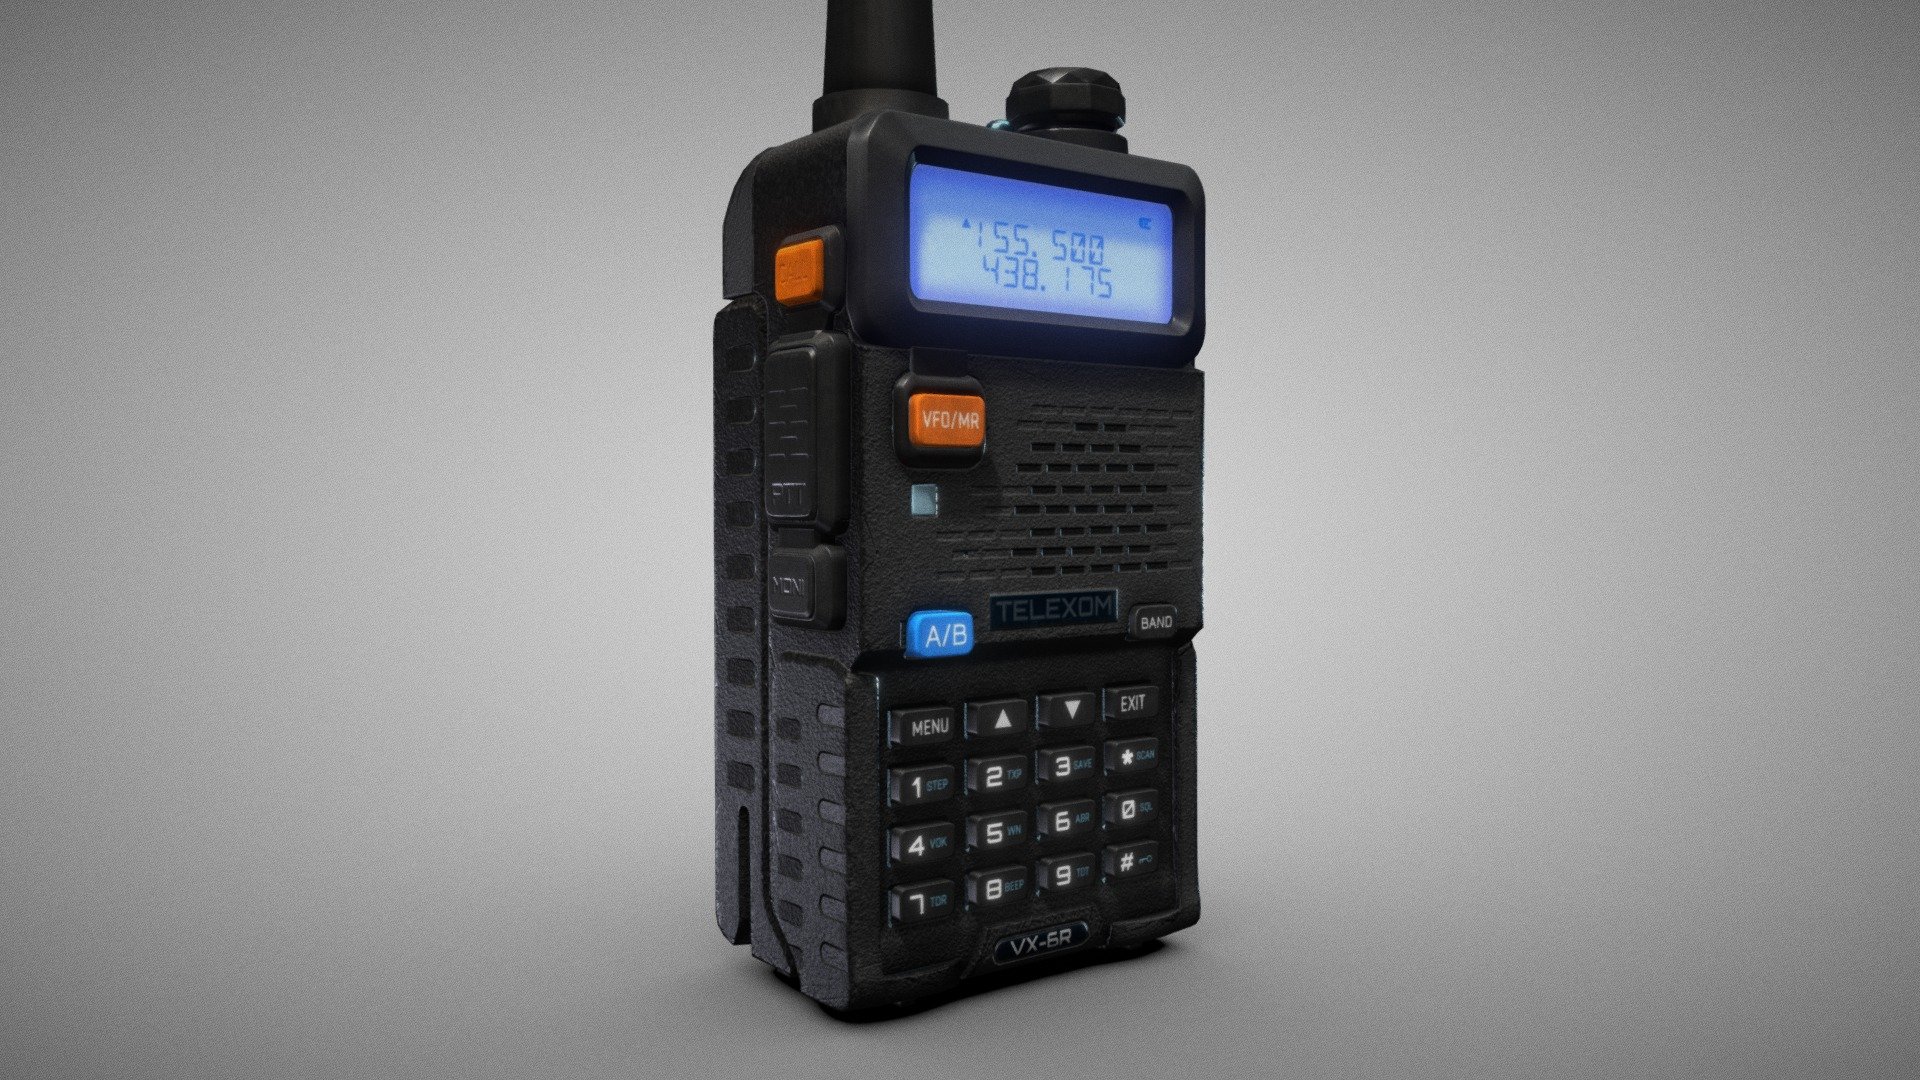 Handheld Portable Radio
Created by Telexom Electronics CO,. LTD,  American telecommunications company.

Hand-held, portable, two-way radio transceiver, providing easy communication.

Created based on reference images (Baofeng UV-5R used as a reference)
Modeled in 3DS Max. 3D painted in Substance Painter 3d model